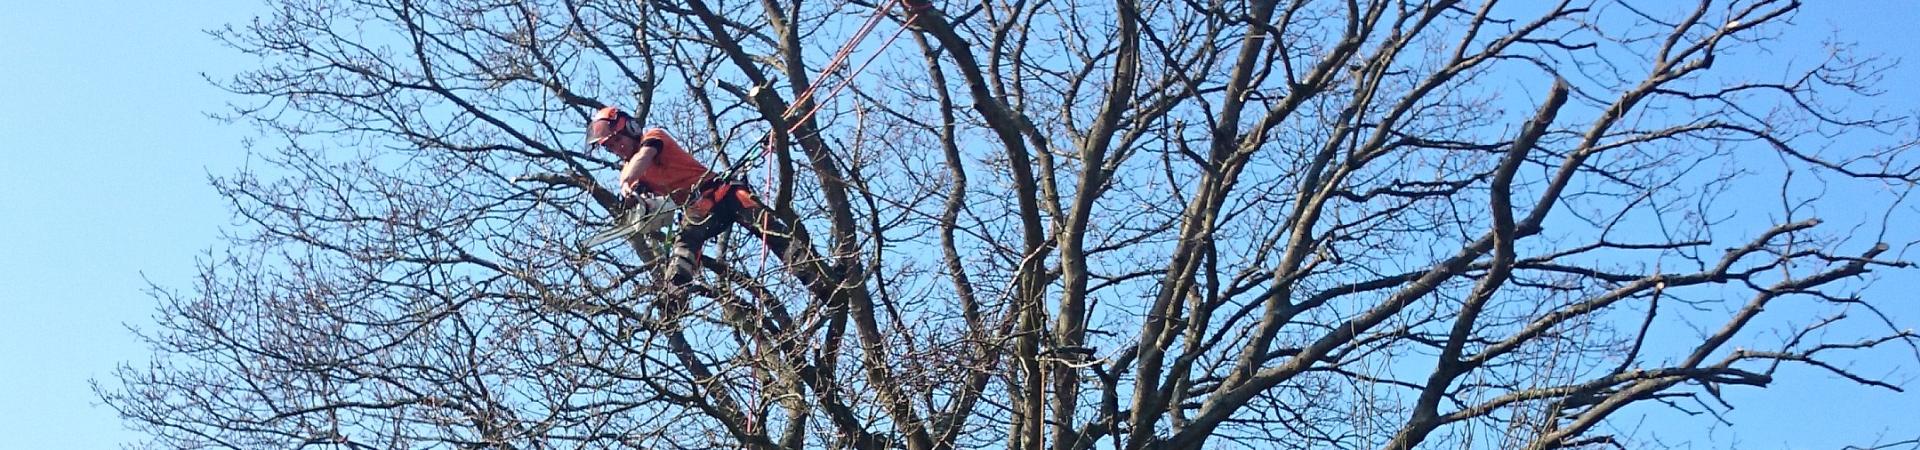 sussex tree surgery climber performing a crown reduction. photo shows work in progress at 50%